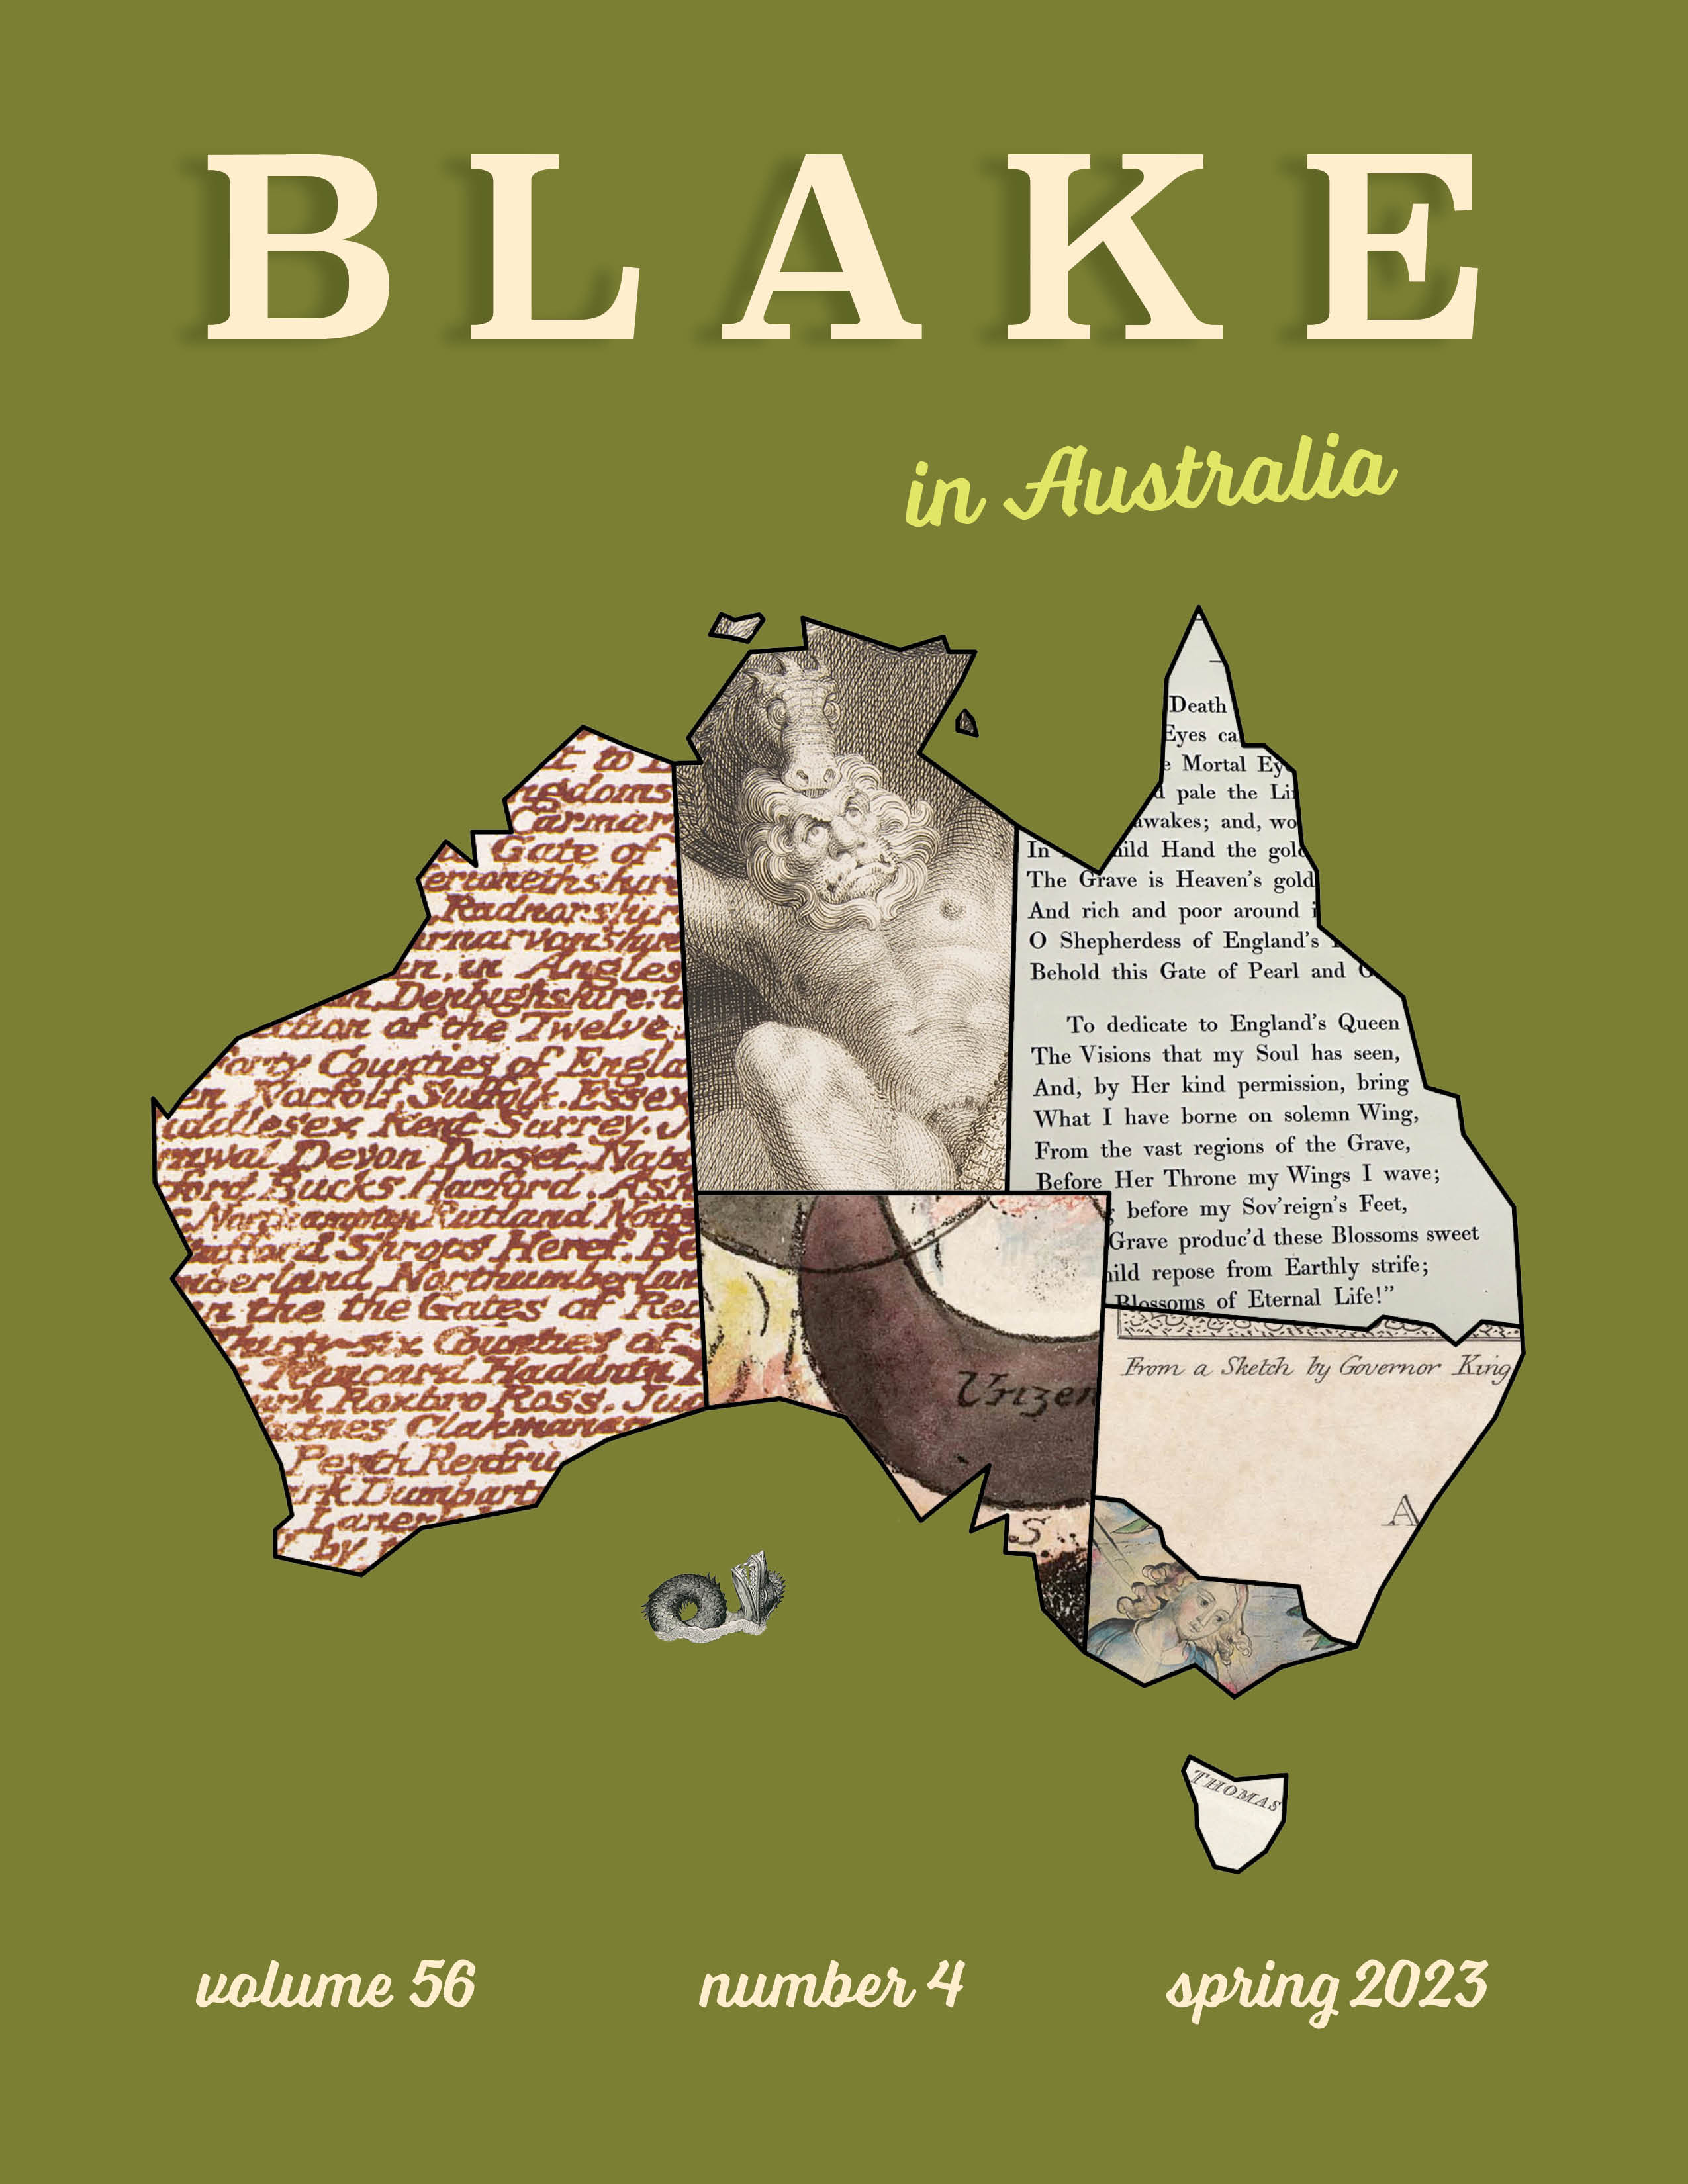 Cover of spring 2023 issue showing map of Australia